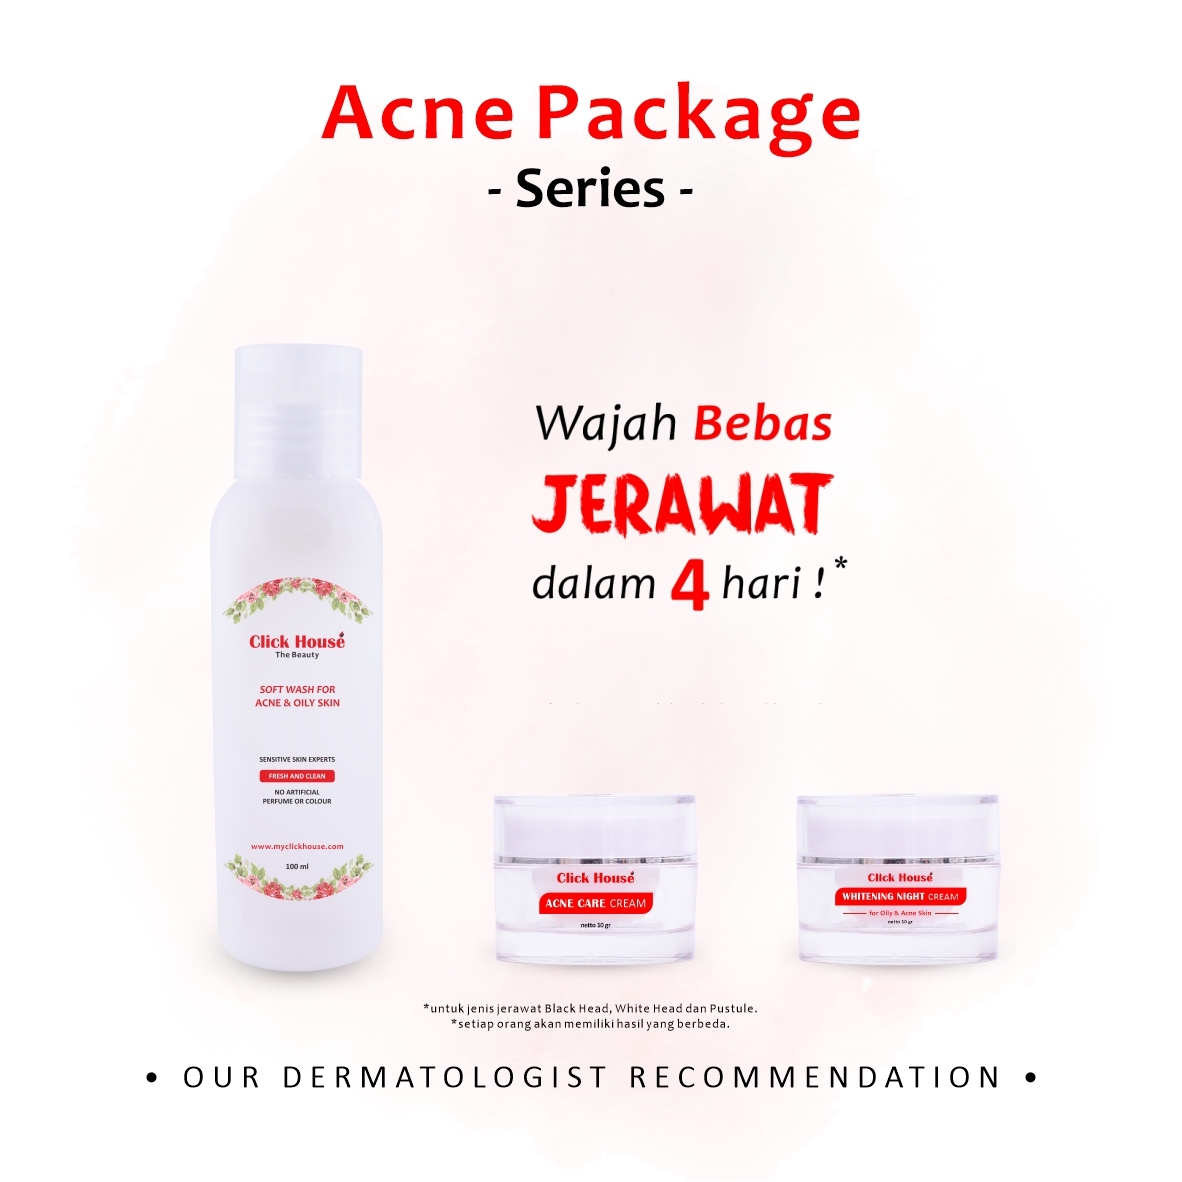 Click House Acne Package Series